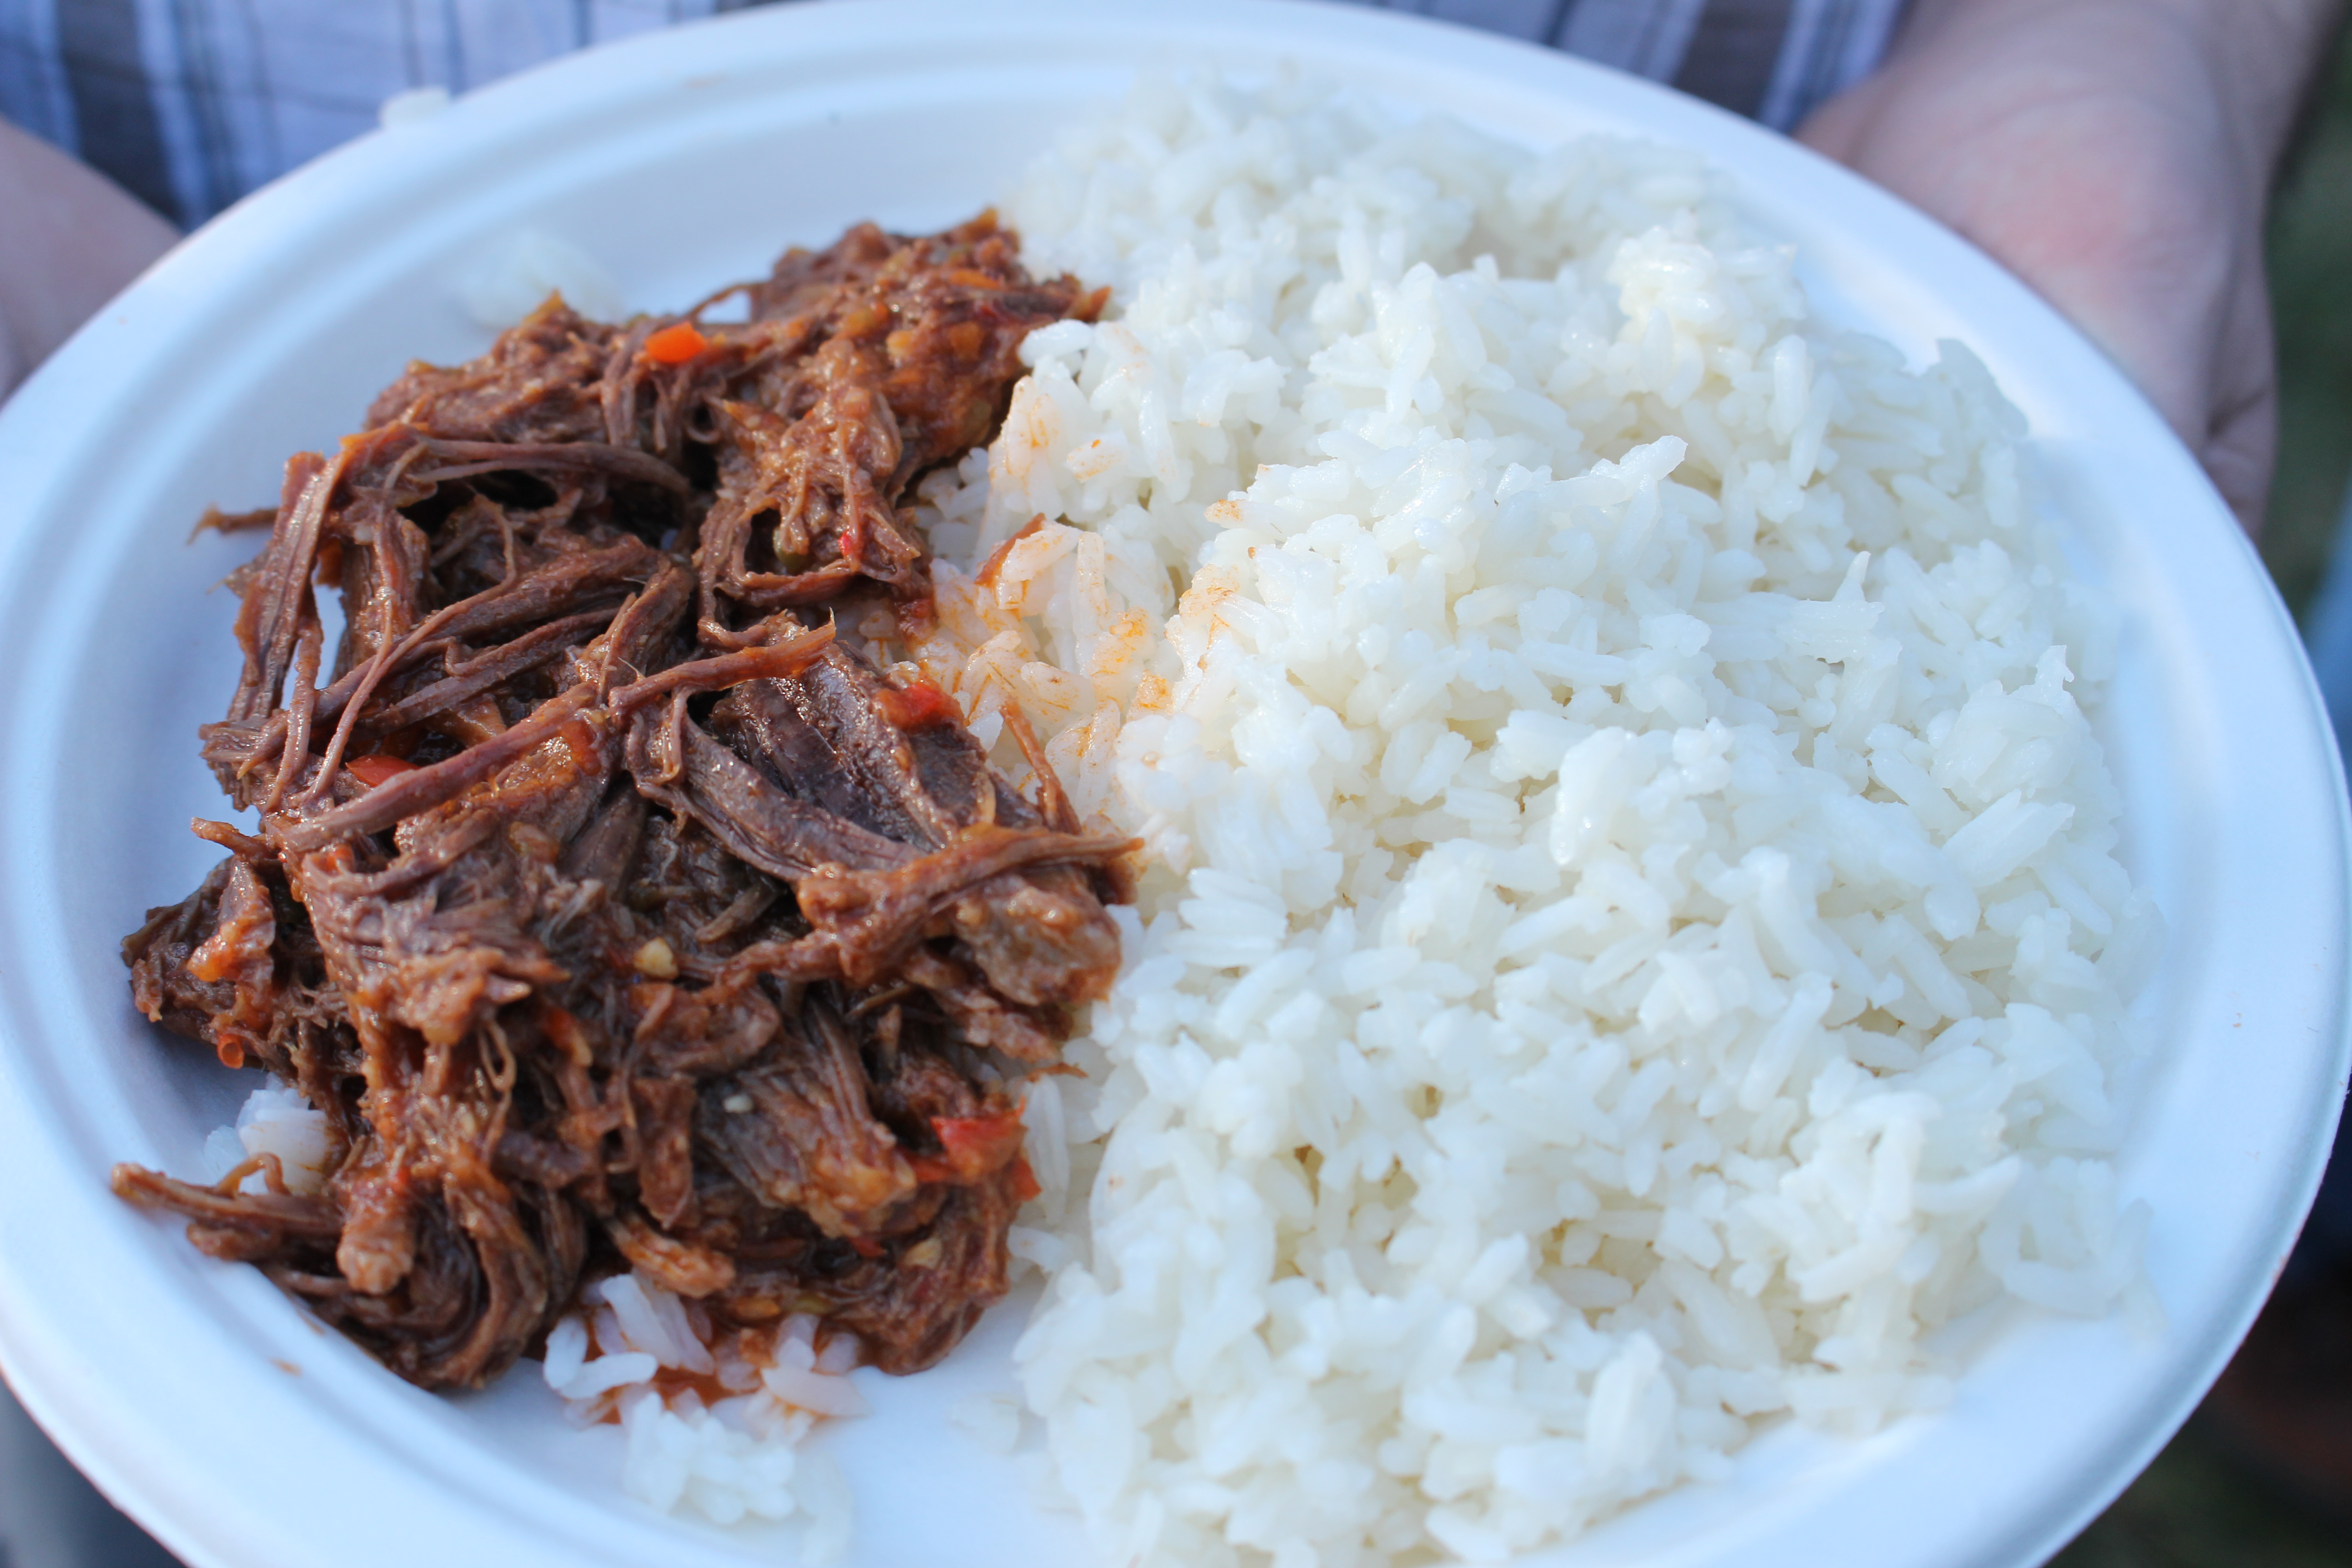 Rice with shredded beef